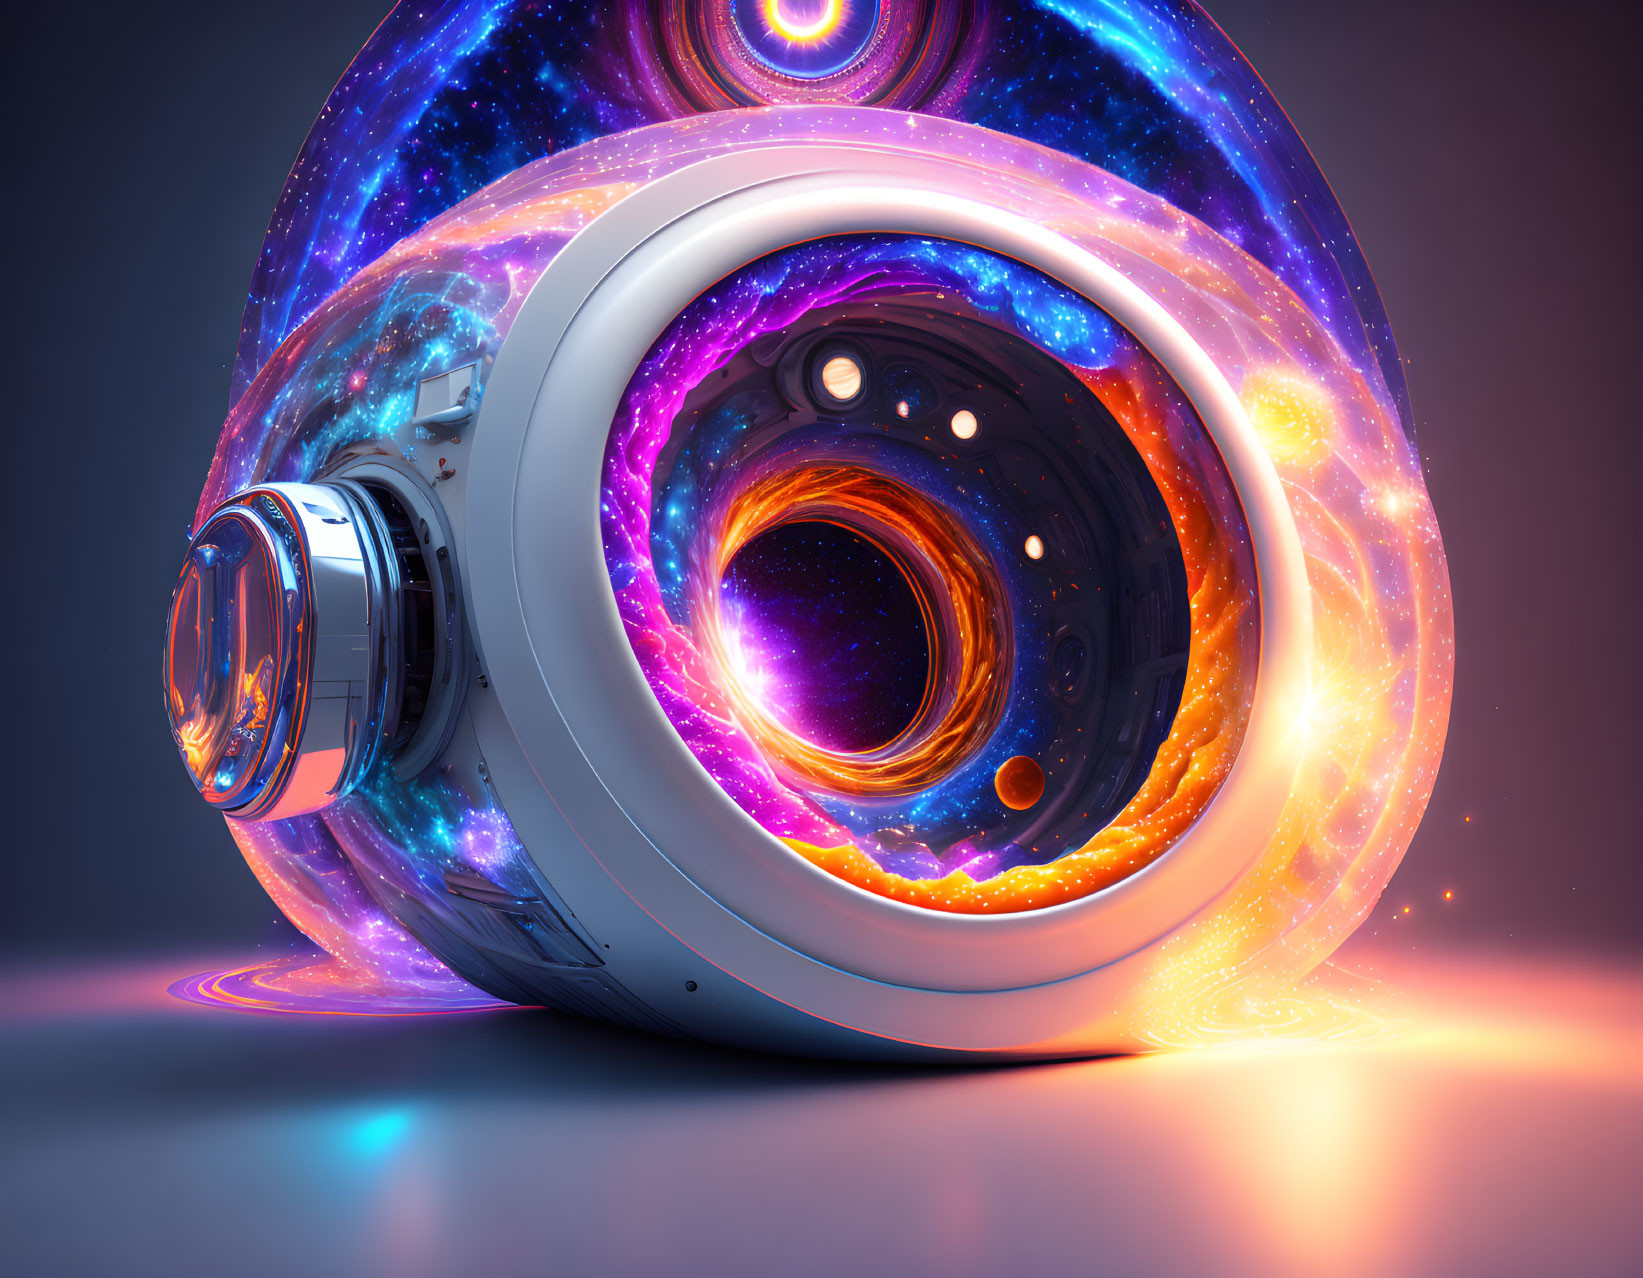 Vibrant 3D-rendered image: Futuristic washing machine with galaxy and black hole inside